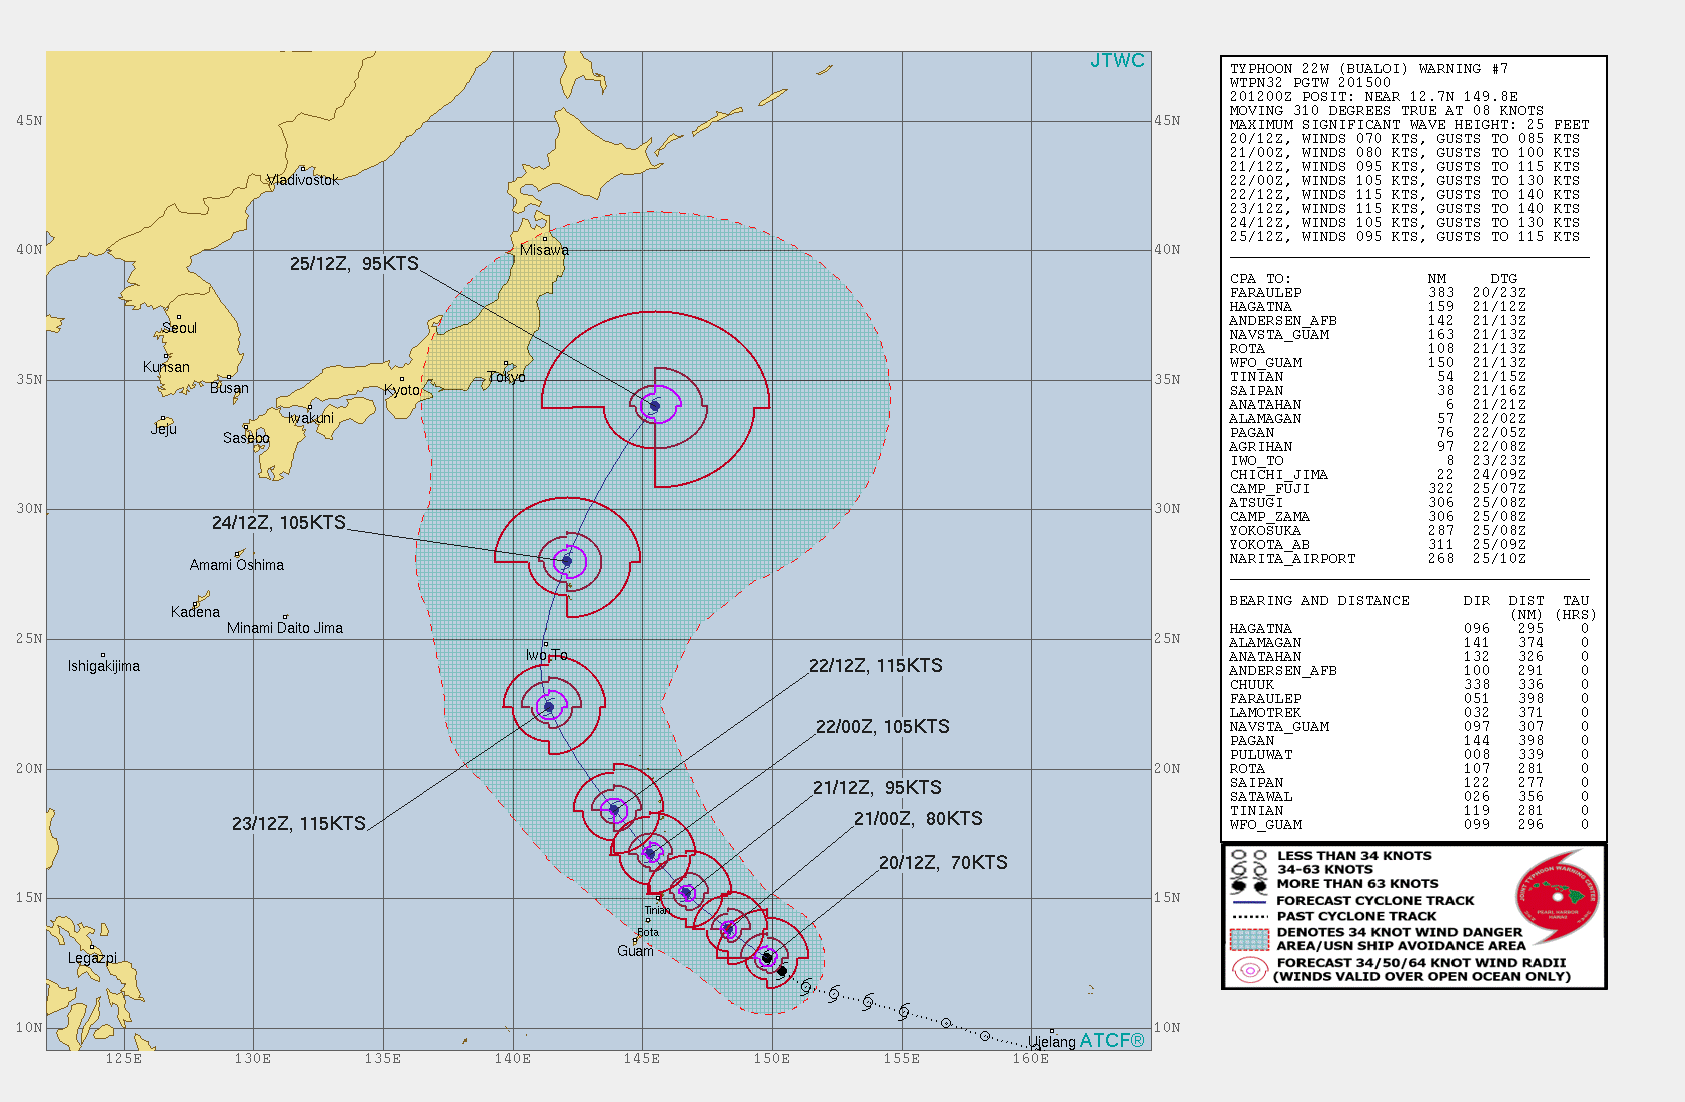 22W: FORECAST TO PEAK AT 115KNOTS(CAT 4 US) IN 48H